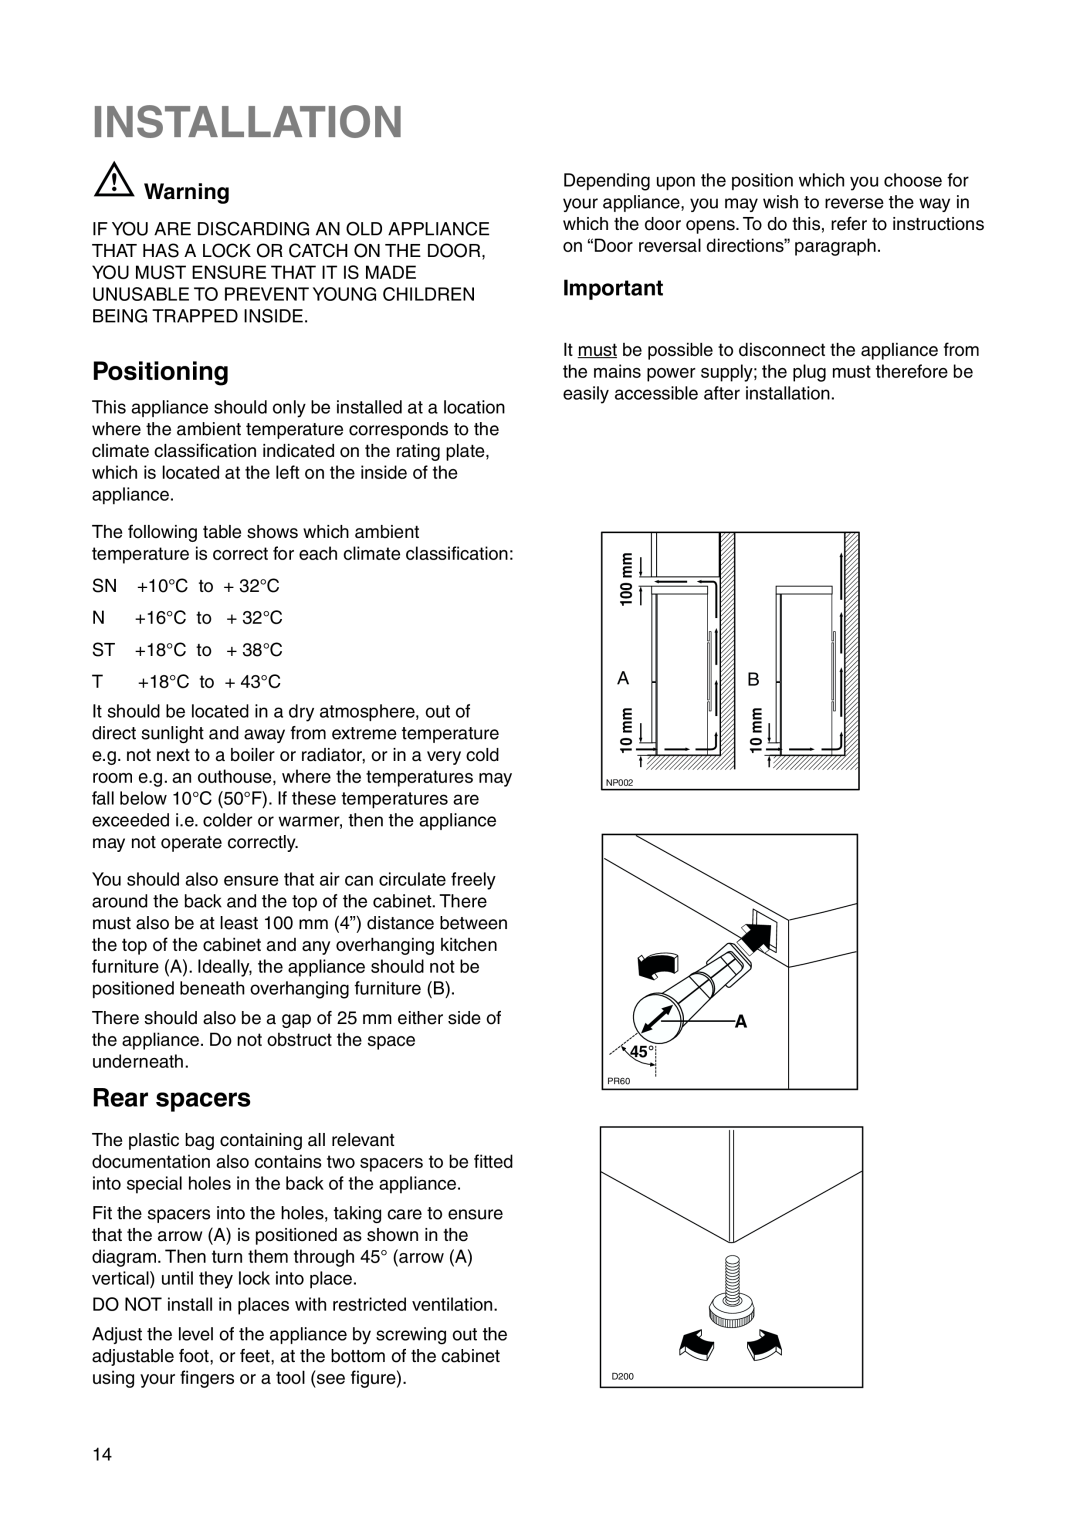 Zanussi ZRB 7725 W manual Installation, Positioning, Rear spacers 